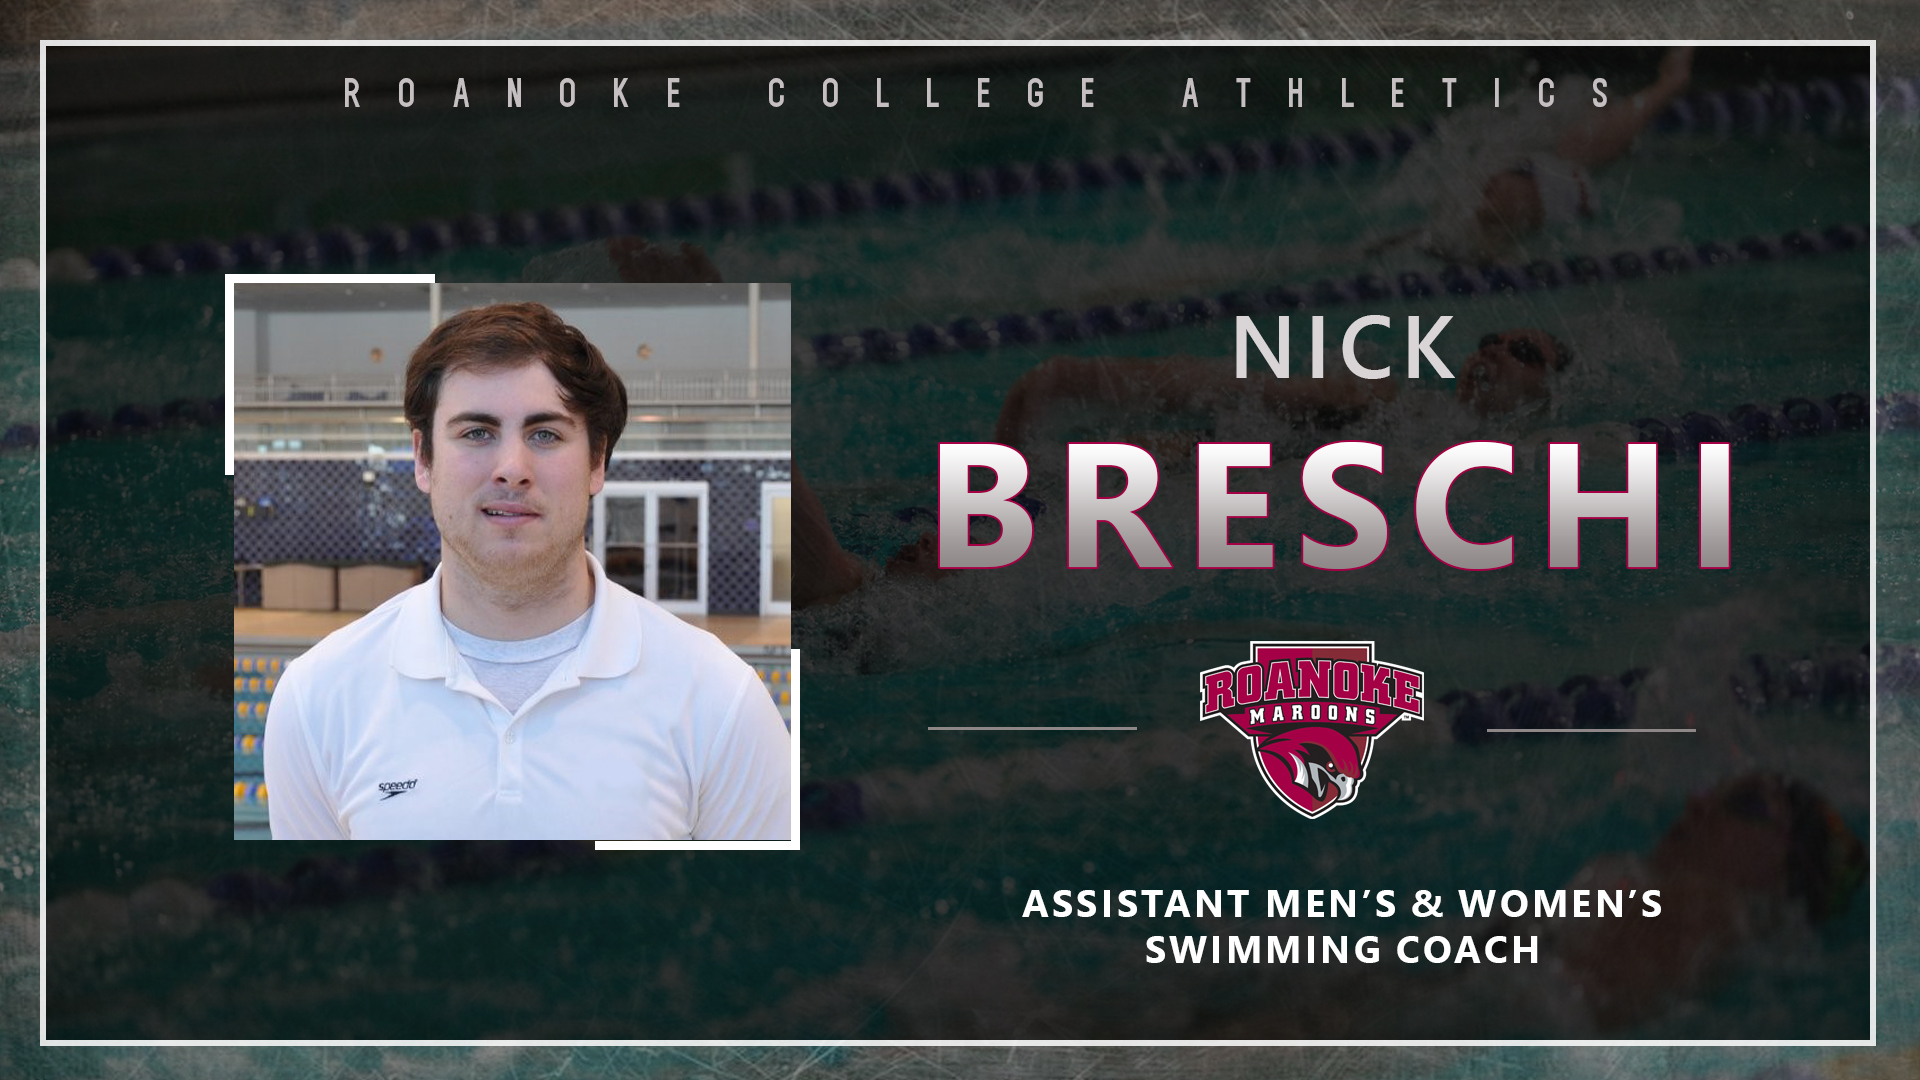 Nick Breschi hired as Assistant Swimming Coach